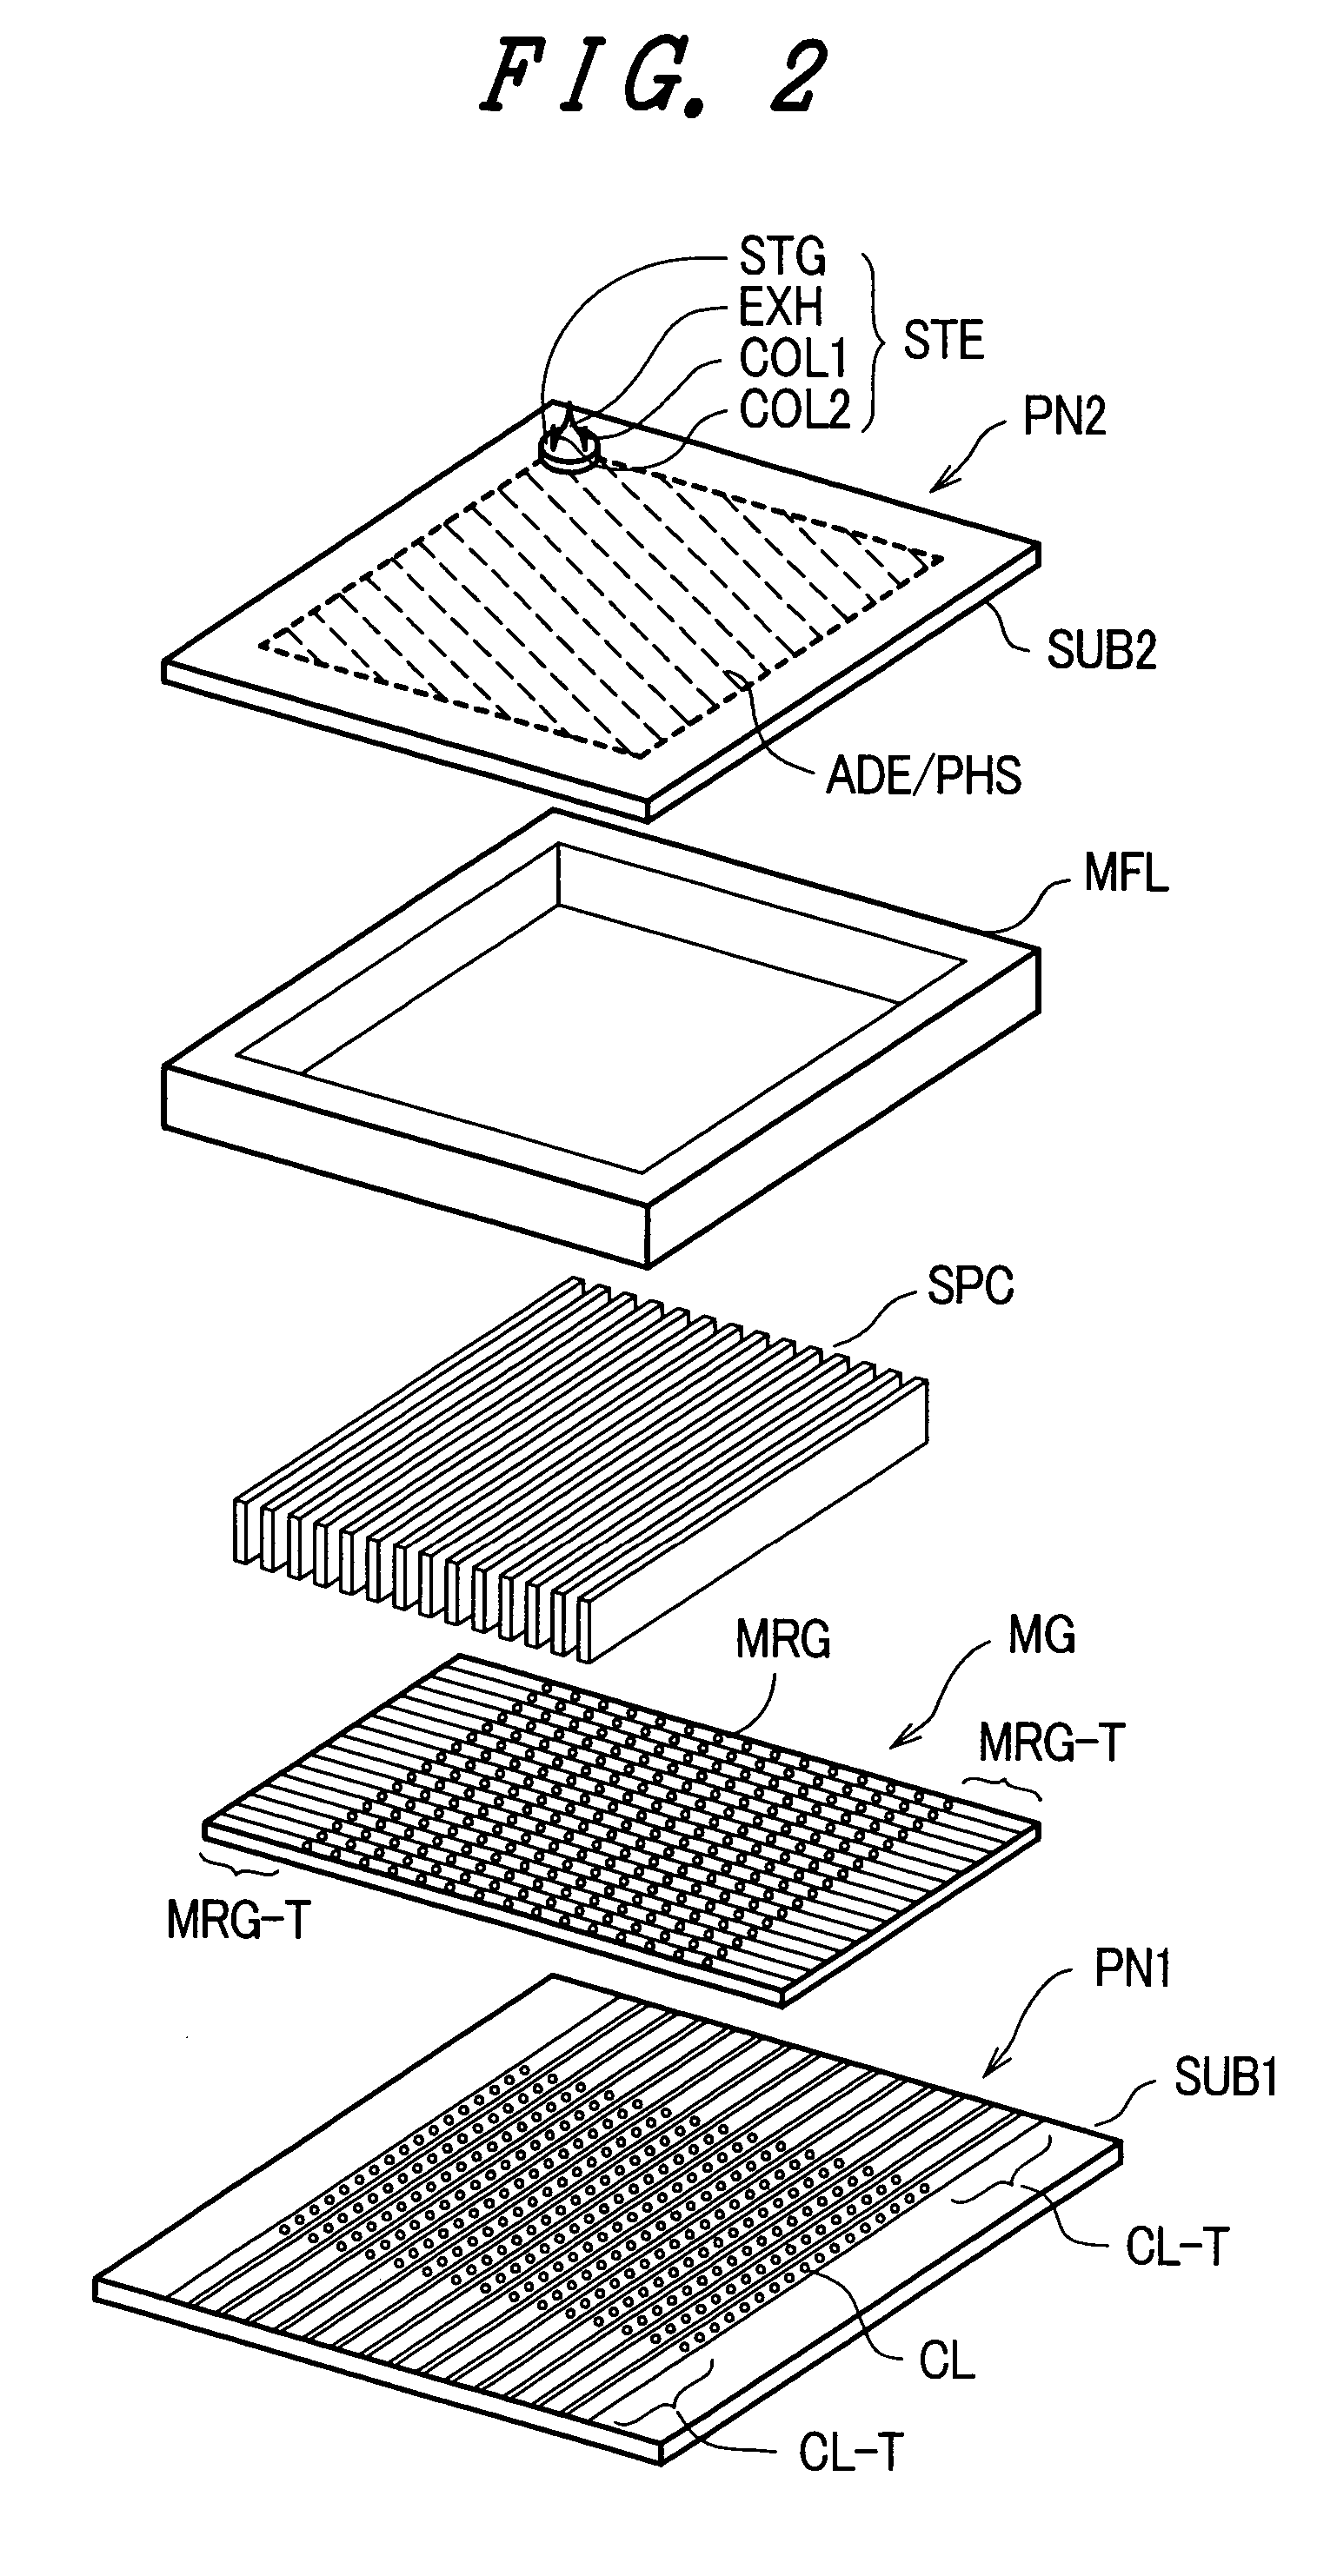 Image display device having electrical lead connections fixed through a portion of an exhausting pipe body